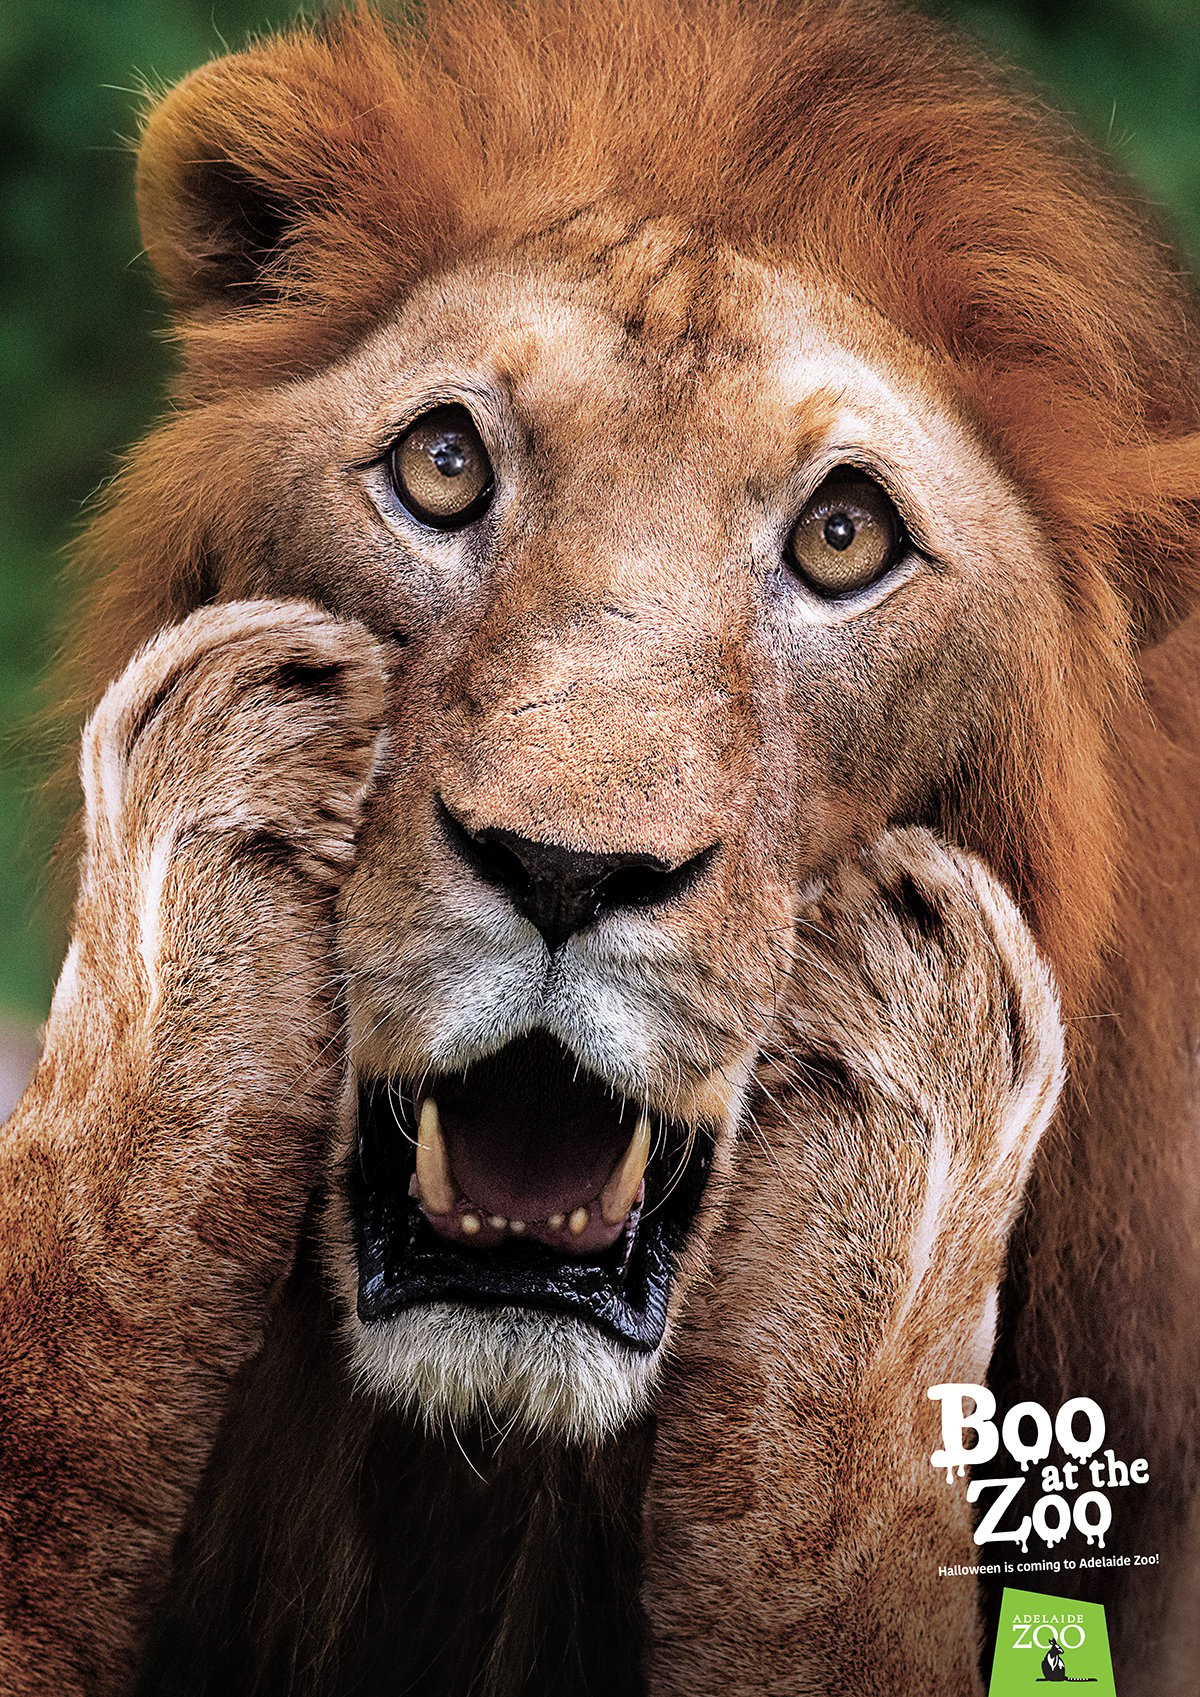 Zoos SA_Boo at the Zoo poster_Lion 1200px